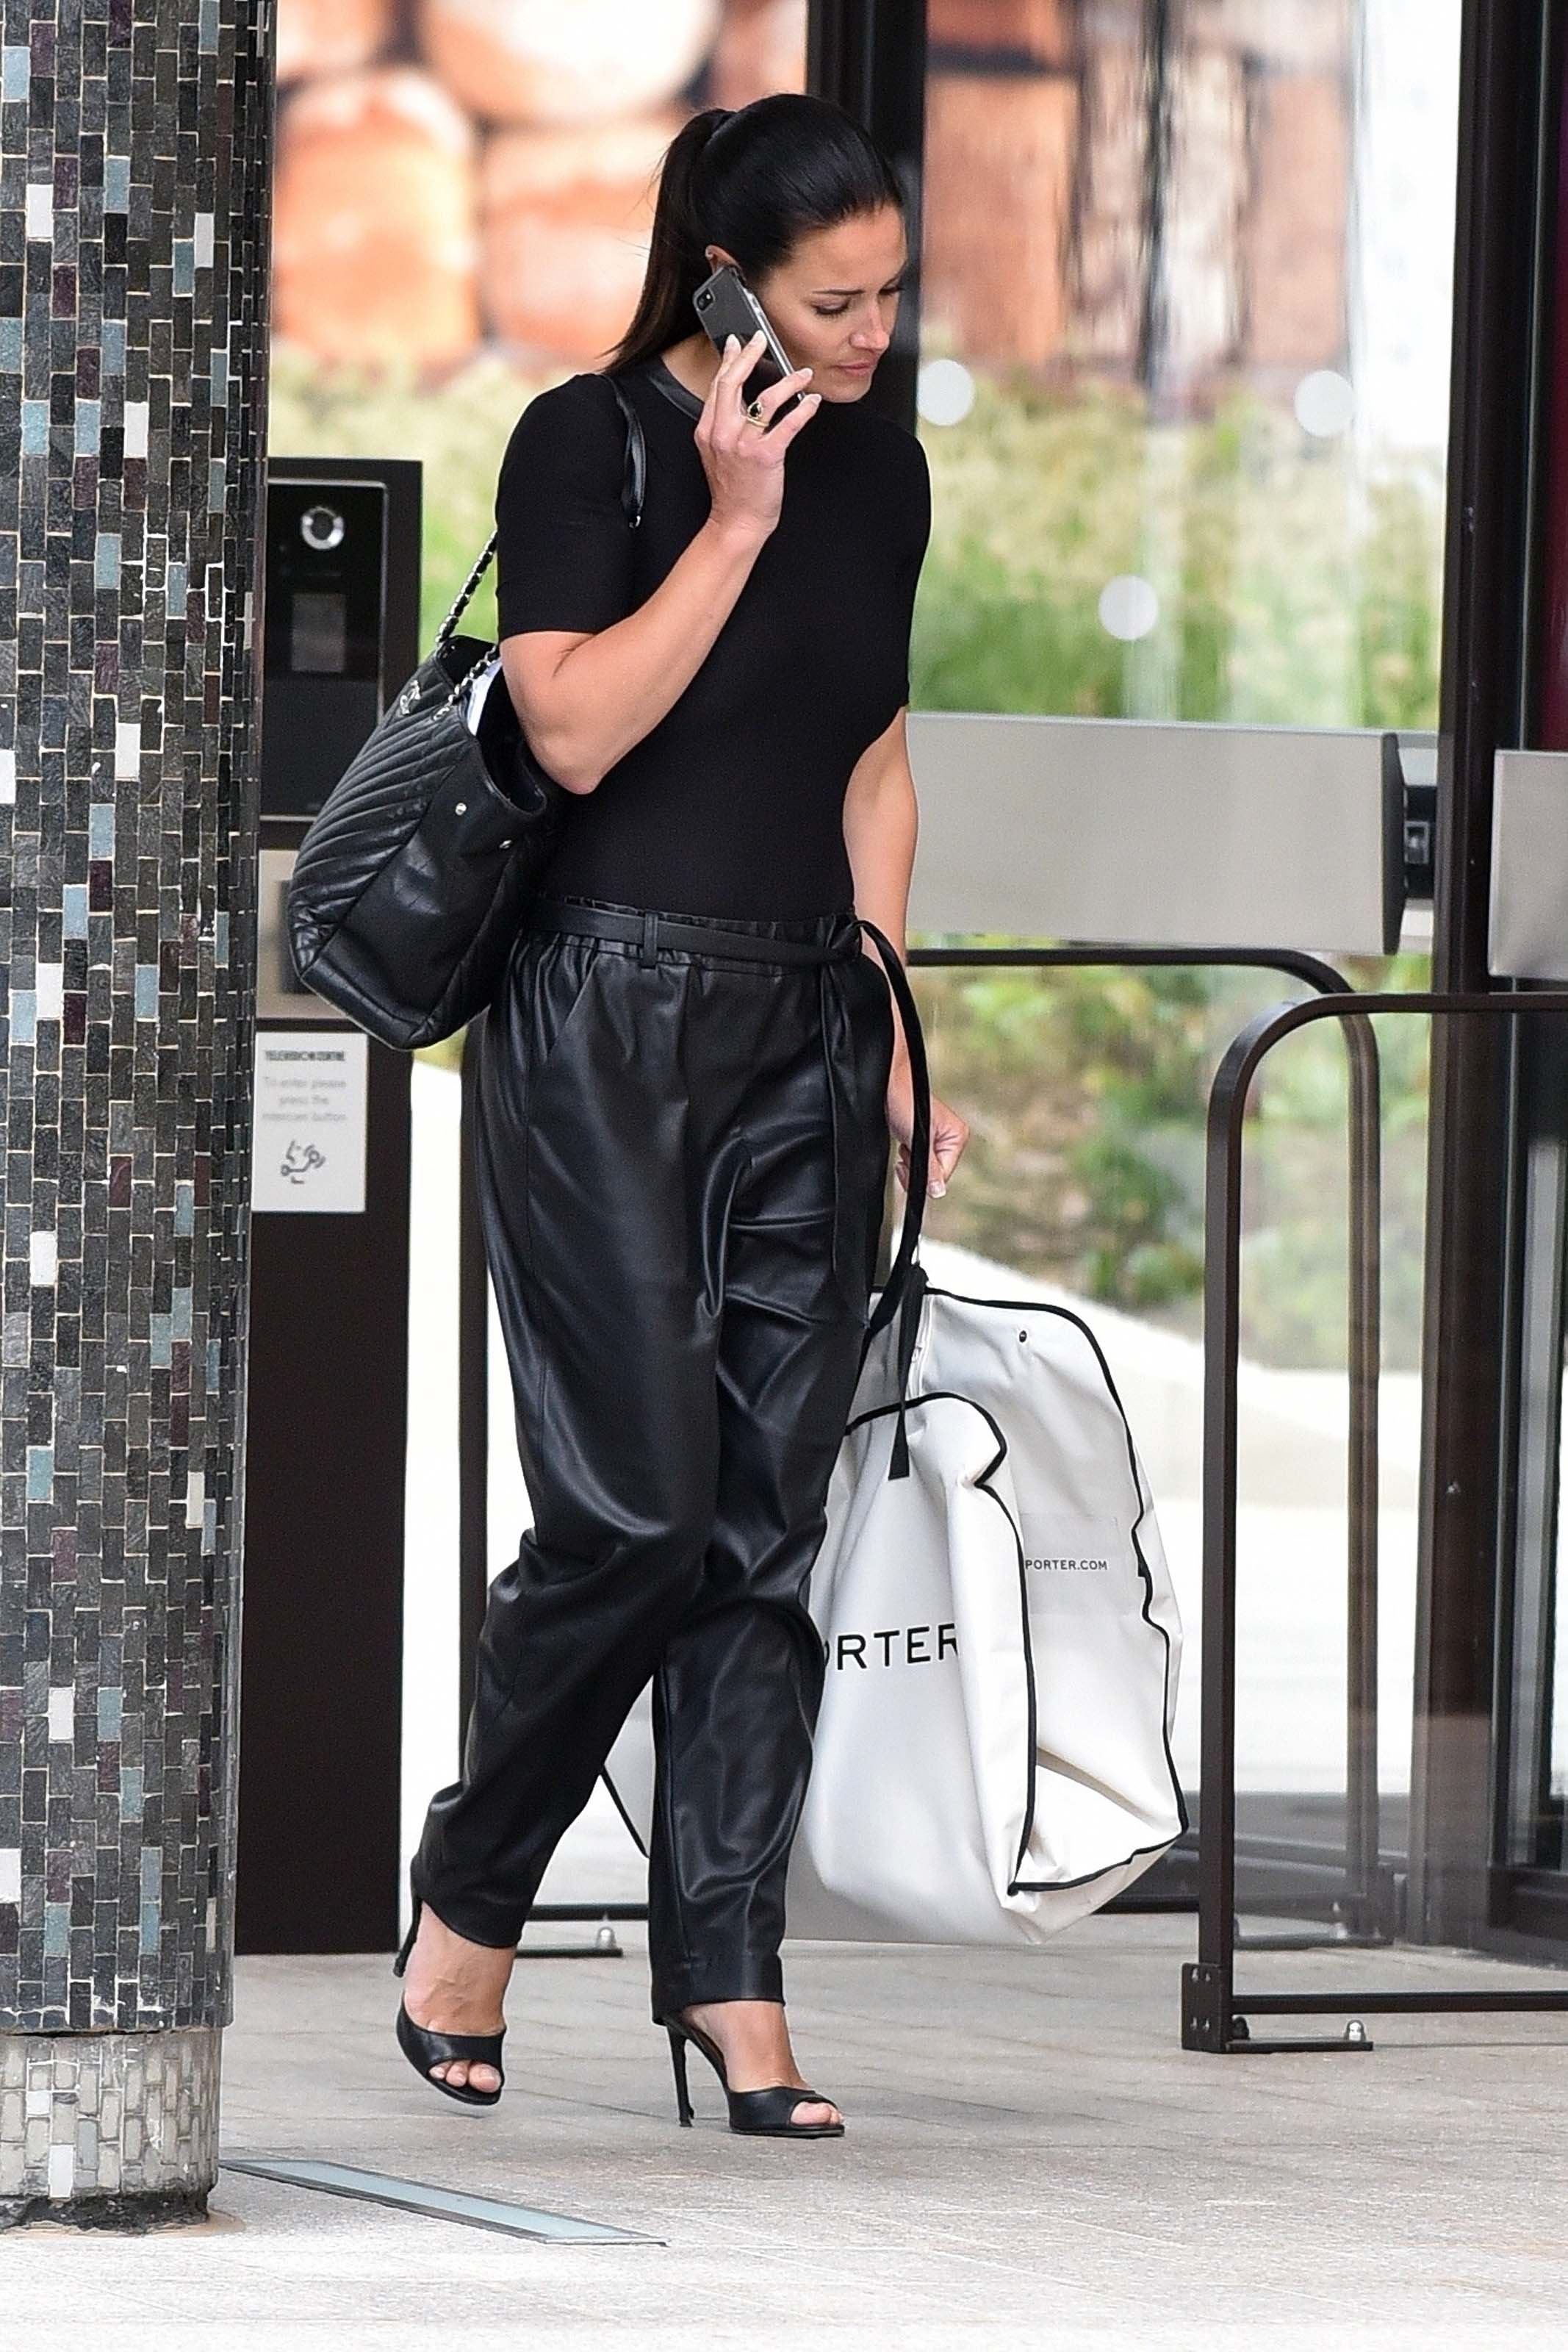 Kirsty Gallacher is seen out in West London